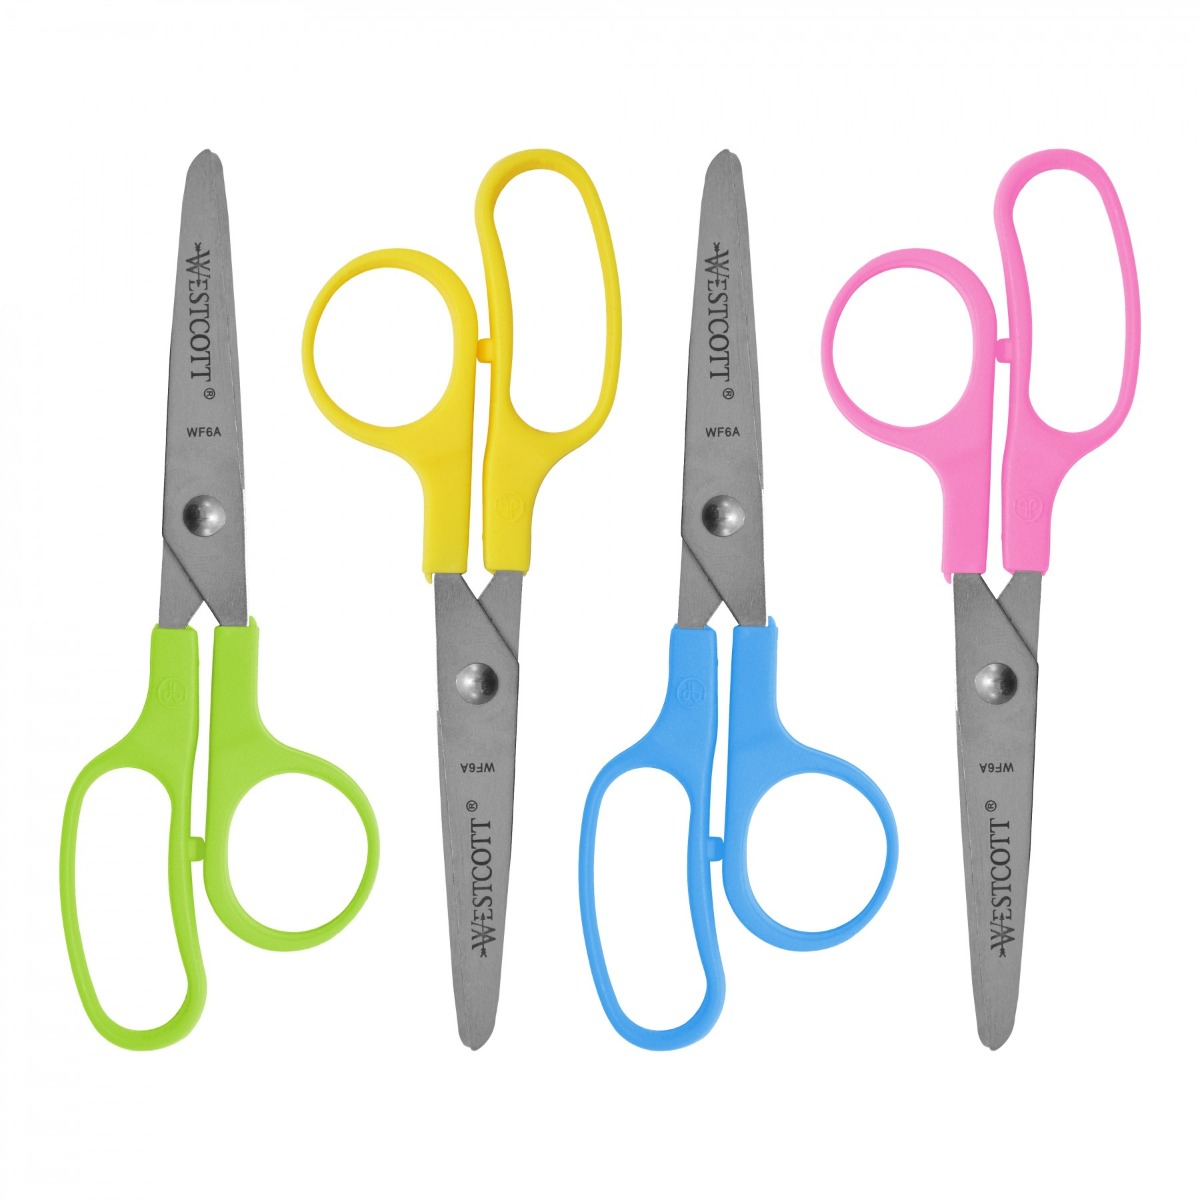 Kids Scissors 12 Count Pointed Kids Scissors right and left-handed scissors  variety colors scissors for school kids Kid Scissors, Craft Scissors